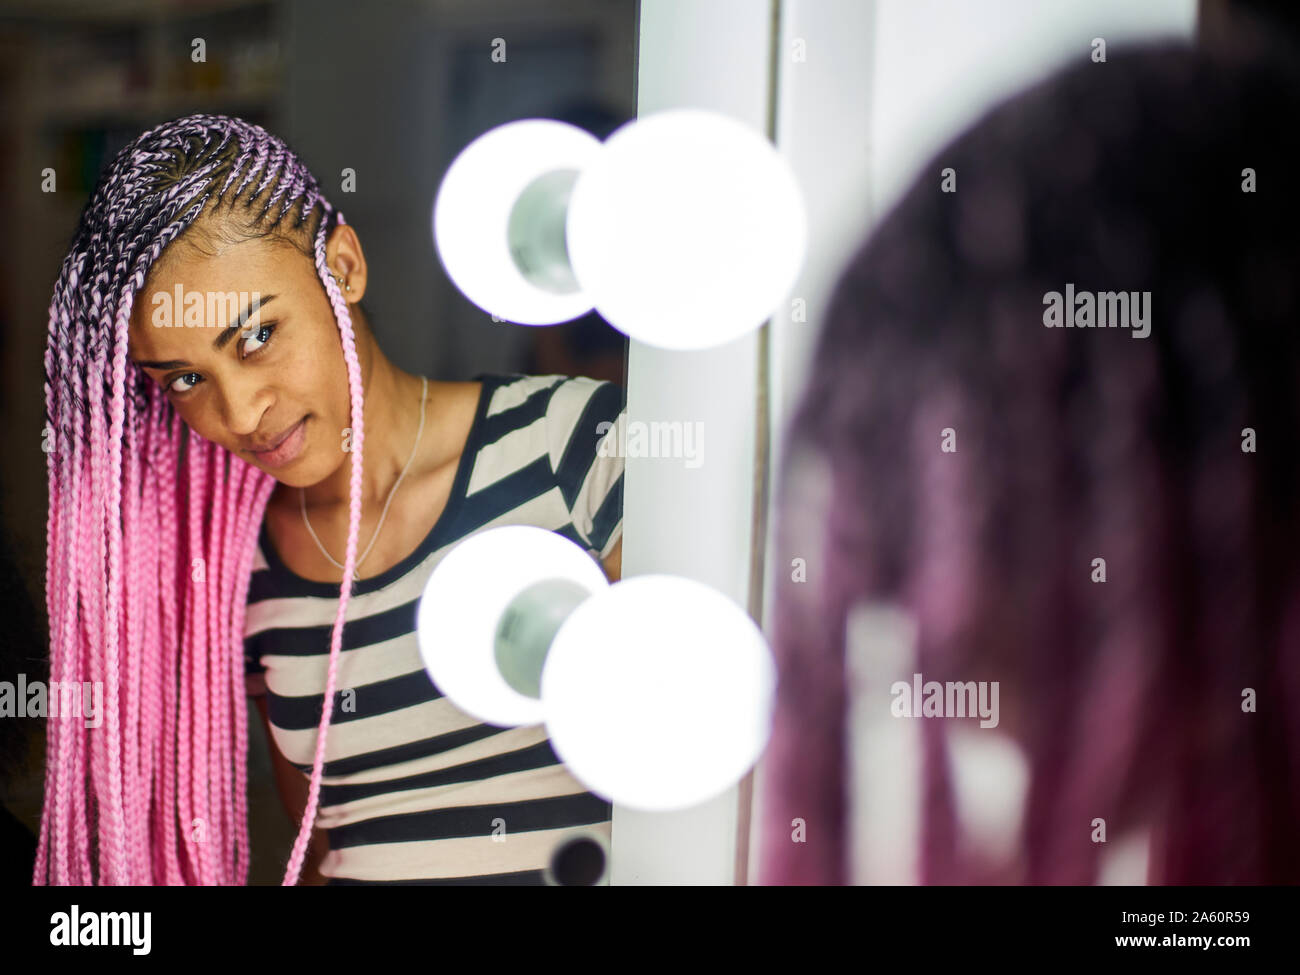 Content young woman with pink braids looking at her mirror image Stock Photo